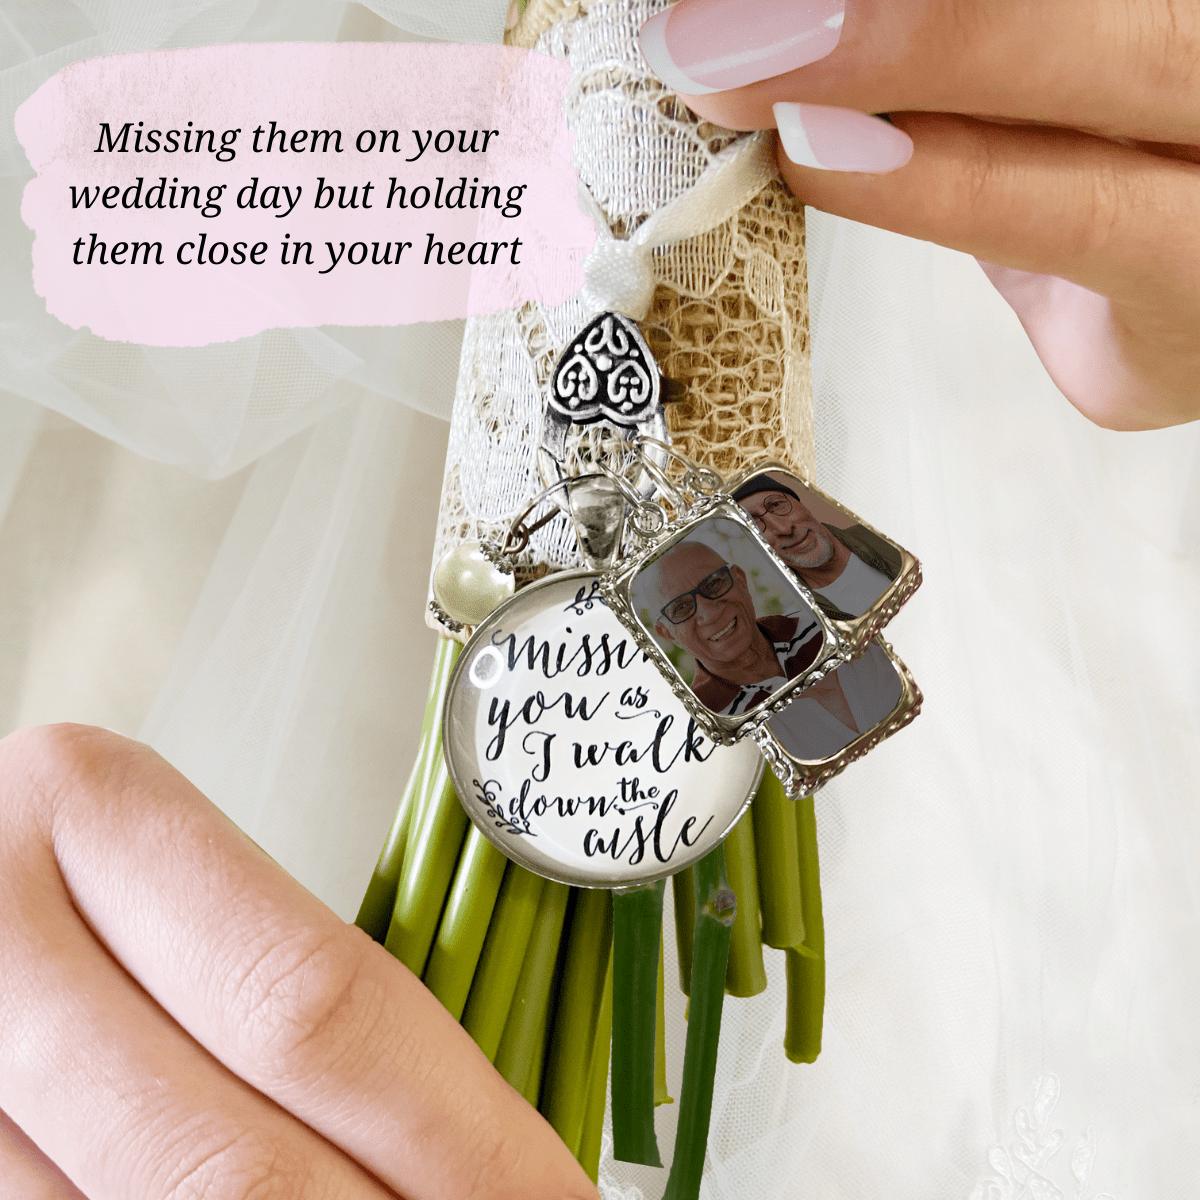 Bouquet Wedding Charm Missing You White Silver Tone Memorial Charm Photo 3 Frames  Bouquet Charm - Gutsy Goodness Handmade Jewelry